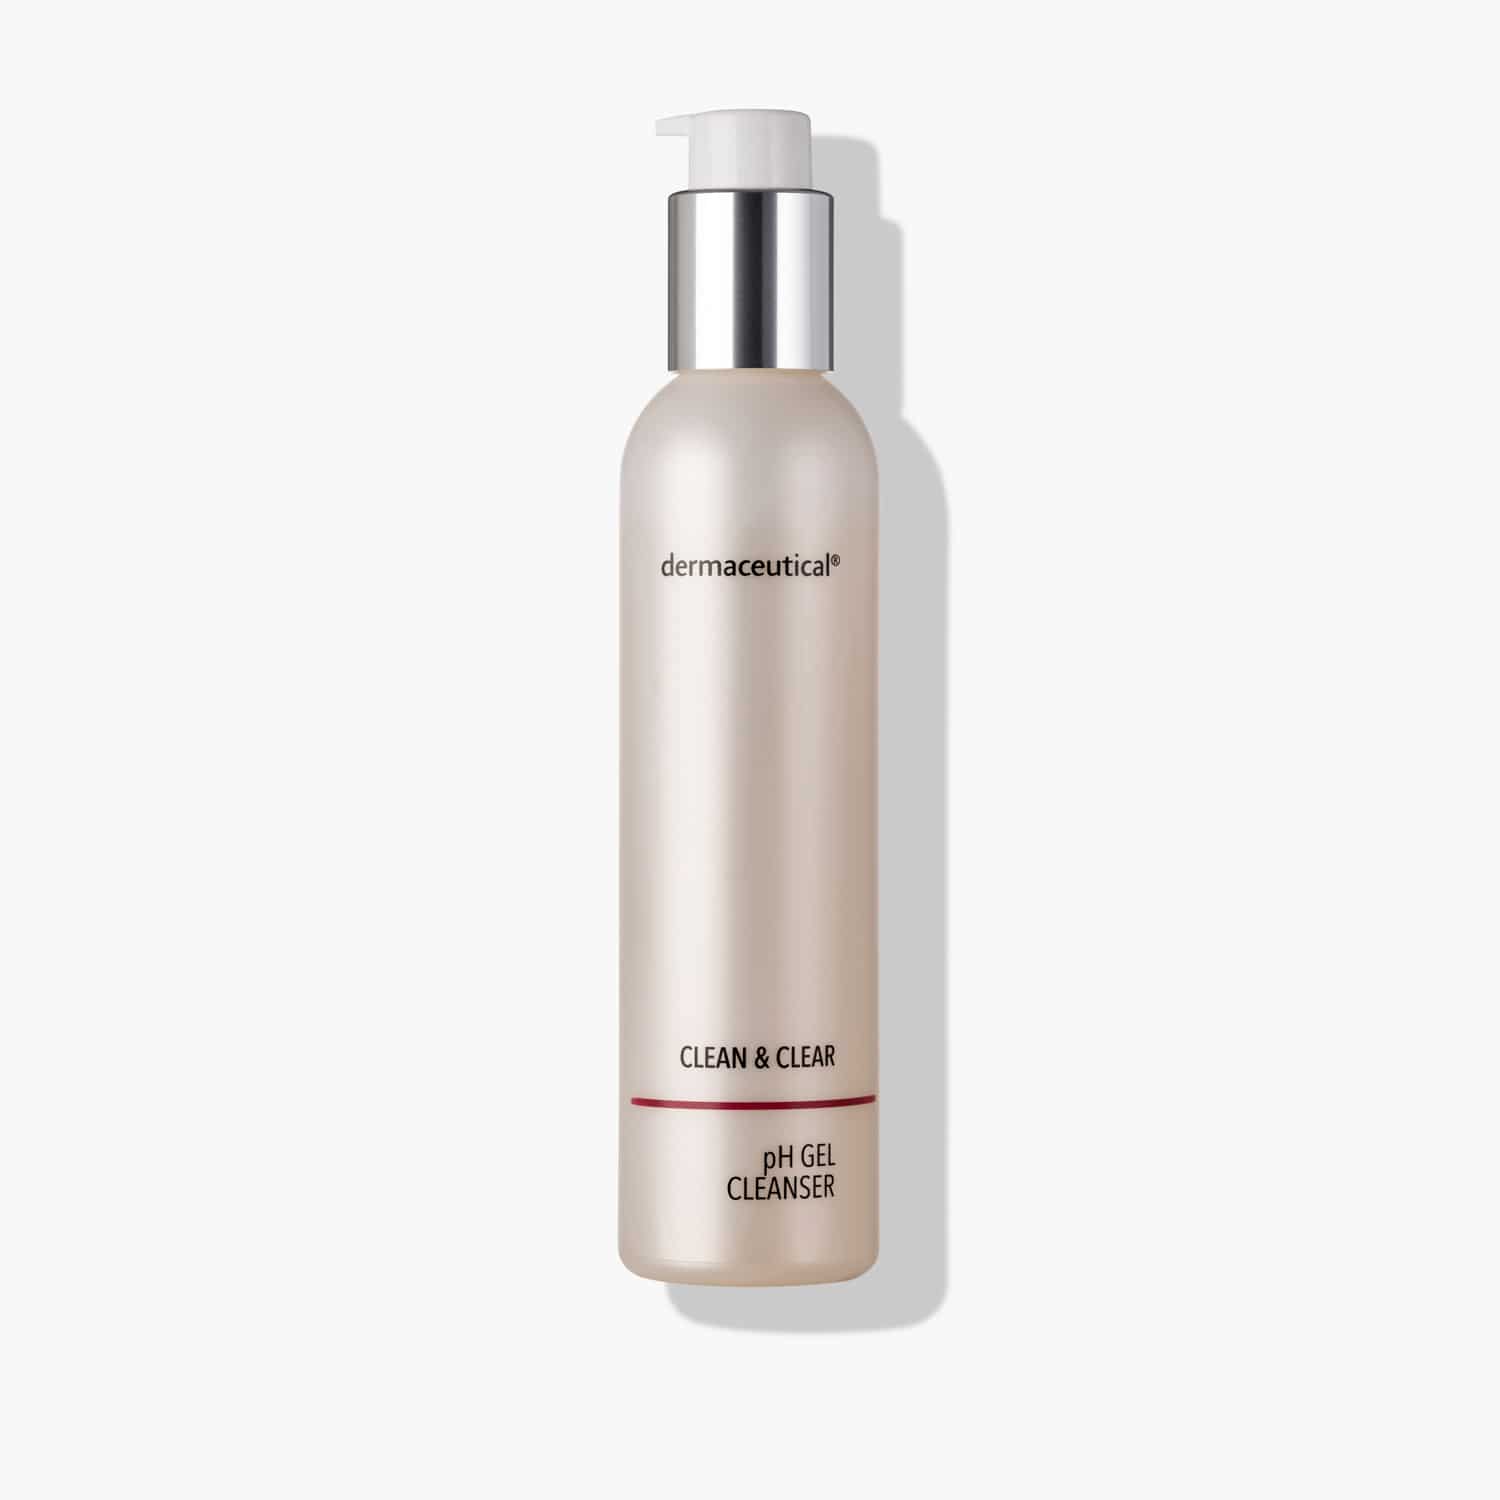 Dermaceutical Clean and Care pH Gel Cleanser